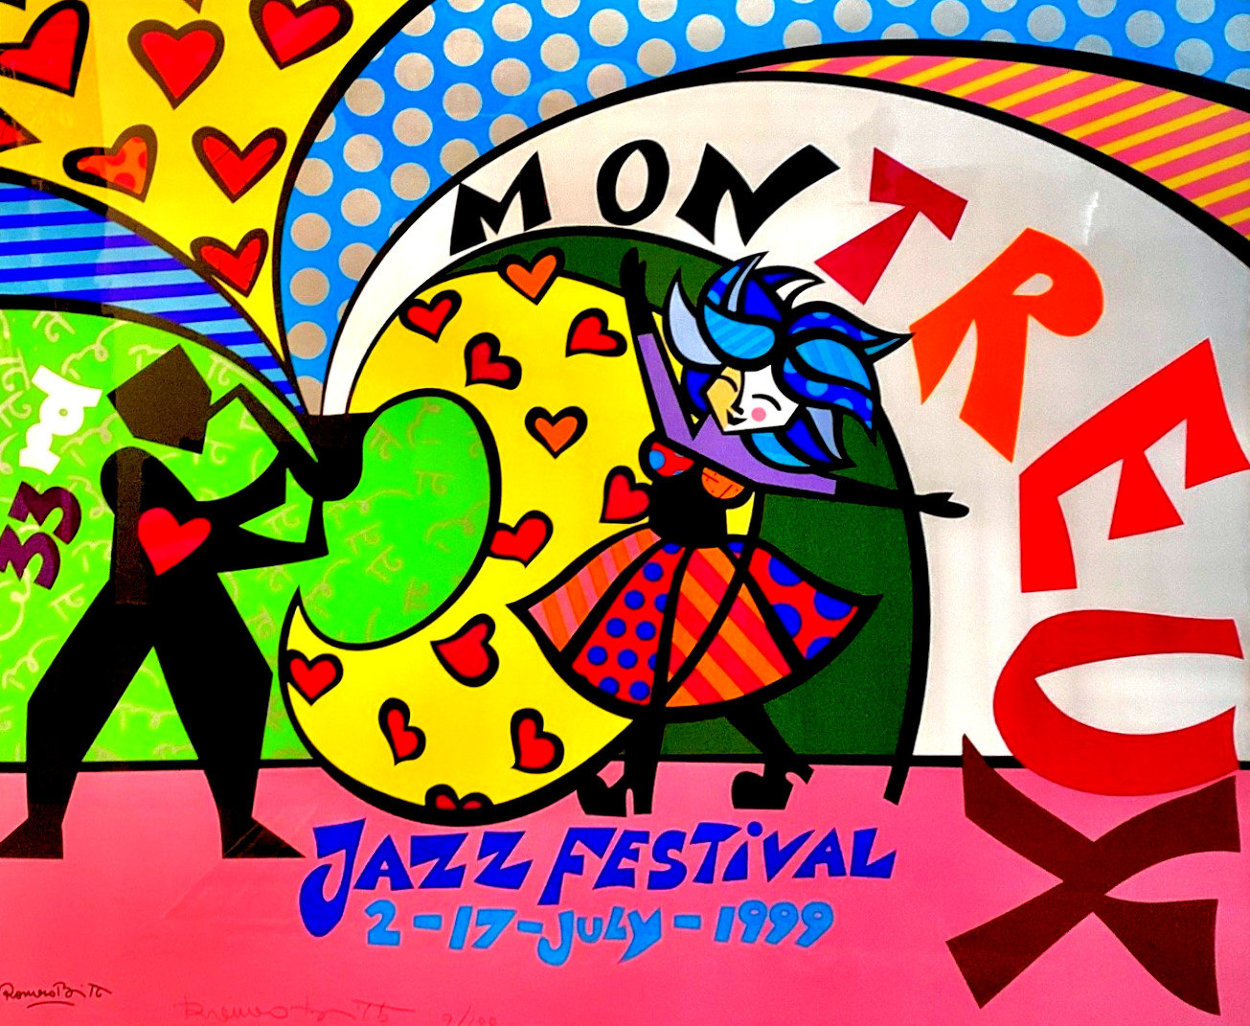 Montreux Jazz 33rd Festival 1999 Limited Edition Print by Romero Britto